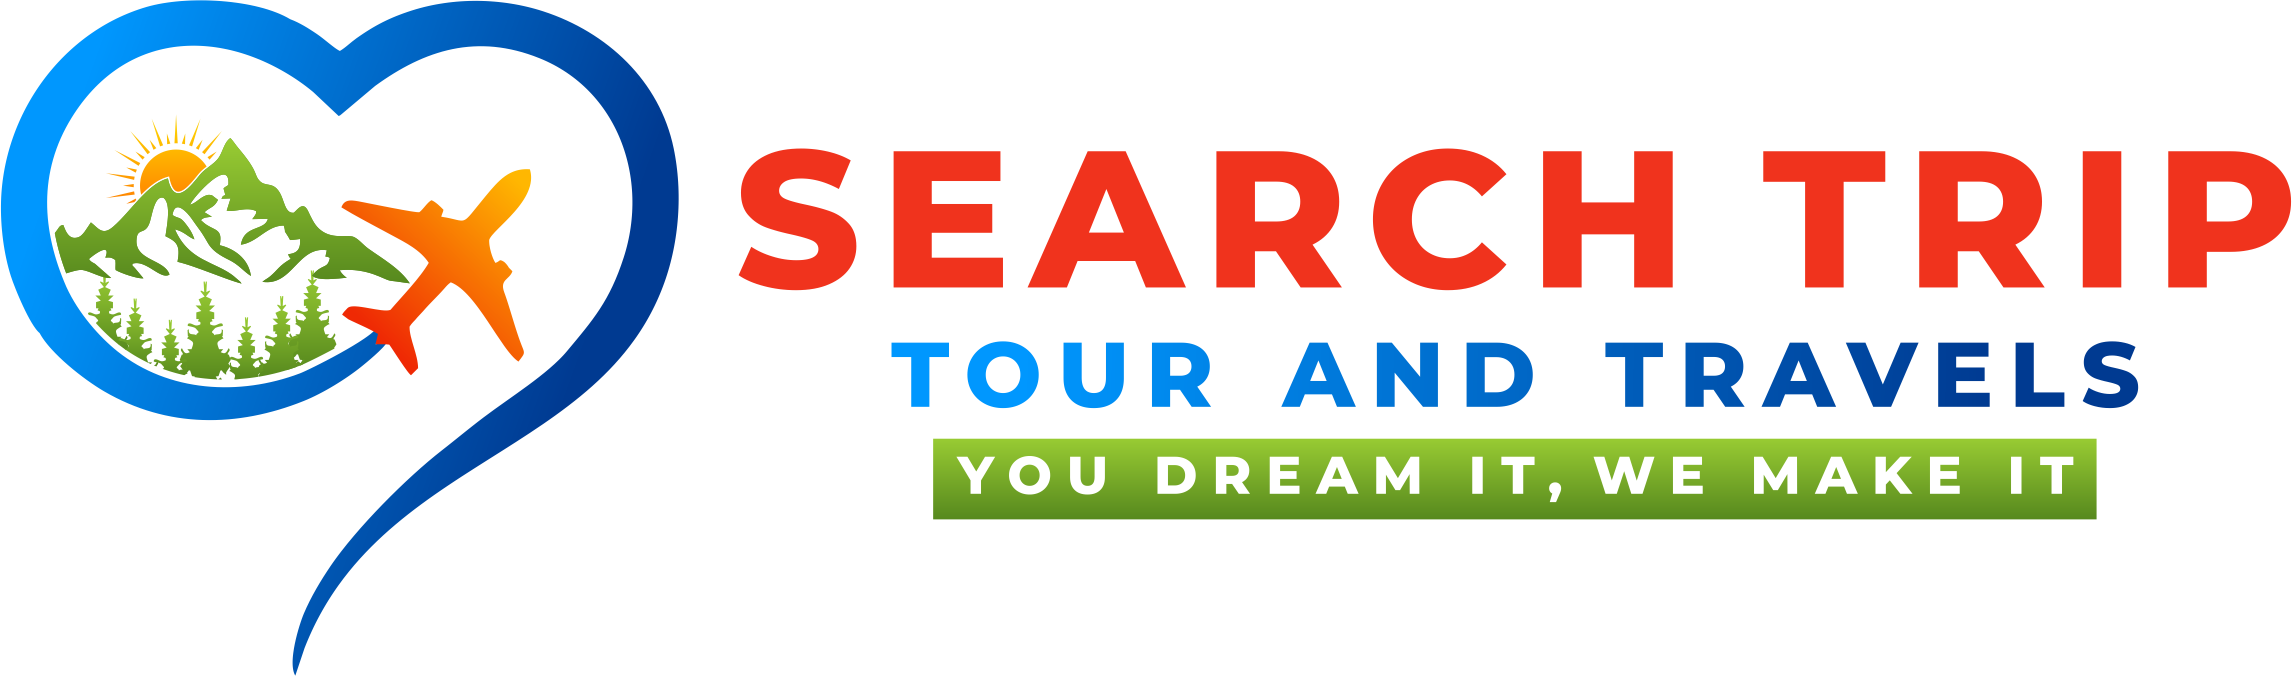 Search Trip Tour And Travels